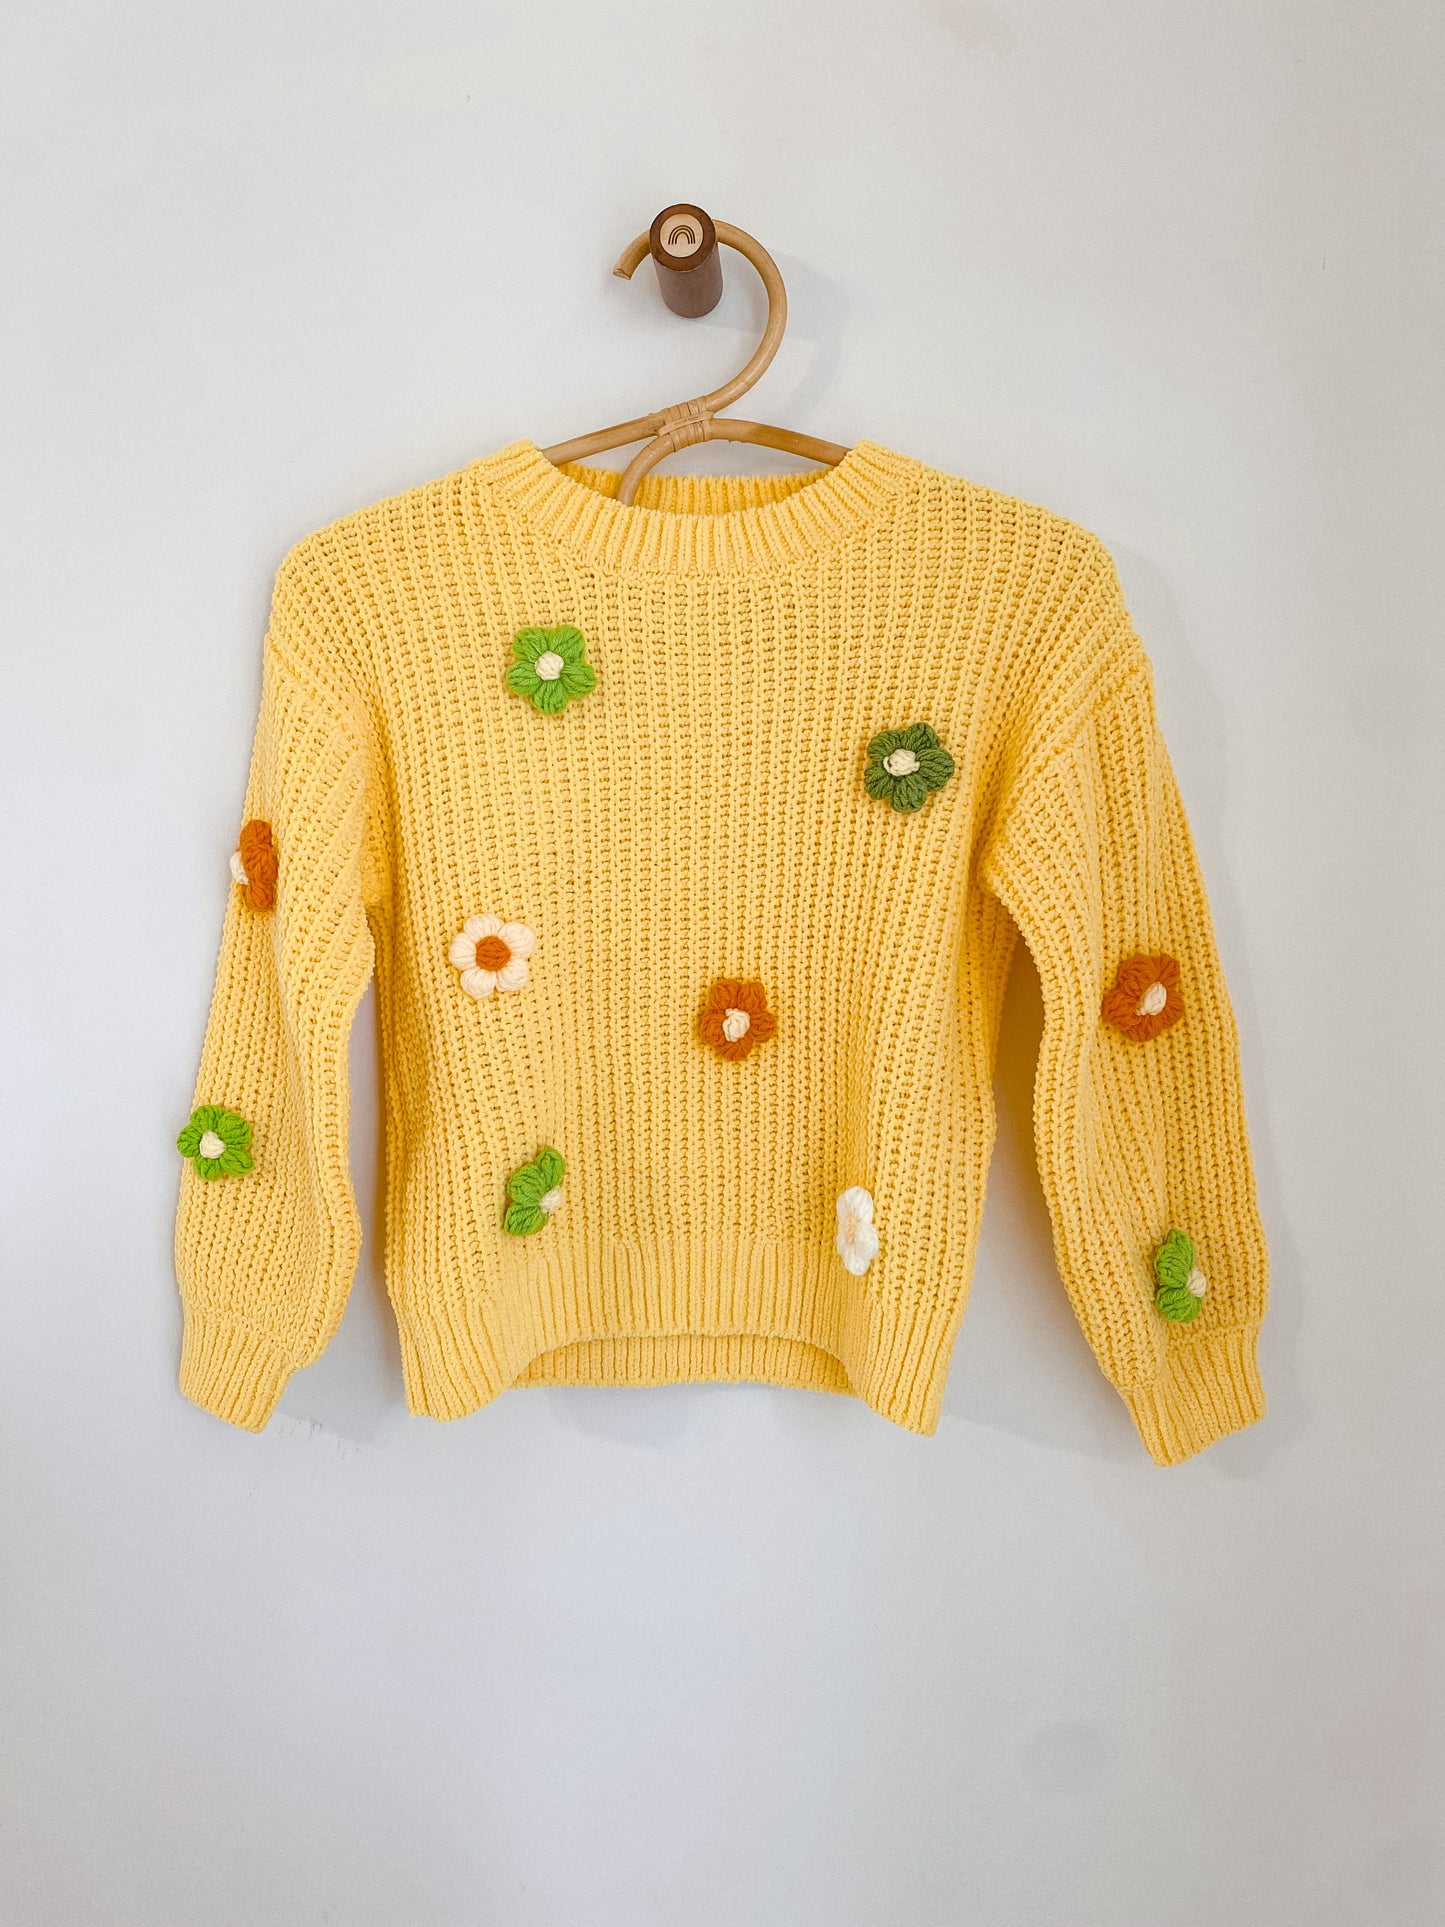 Sweater with crocheted flowers